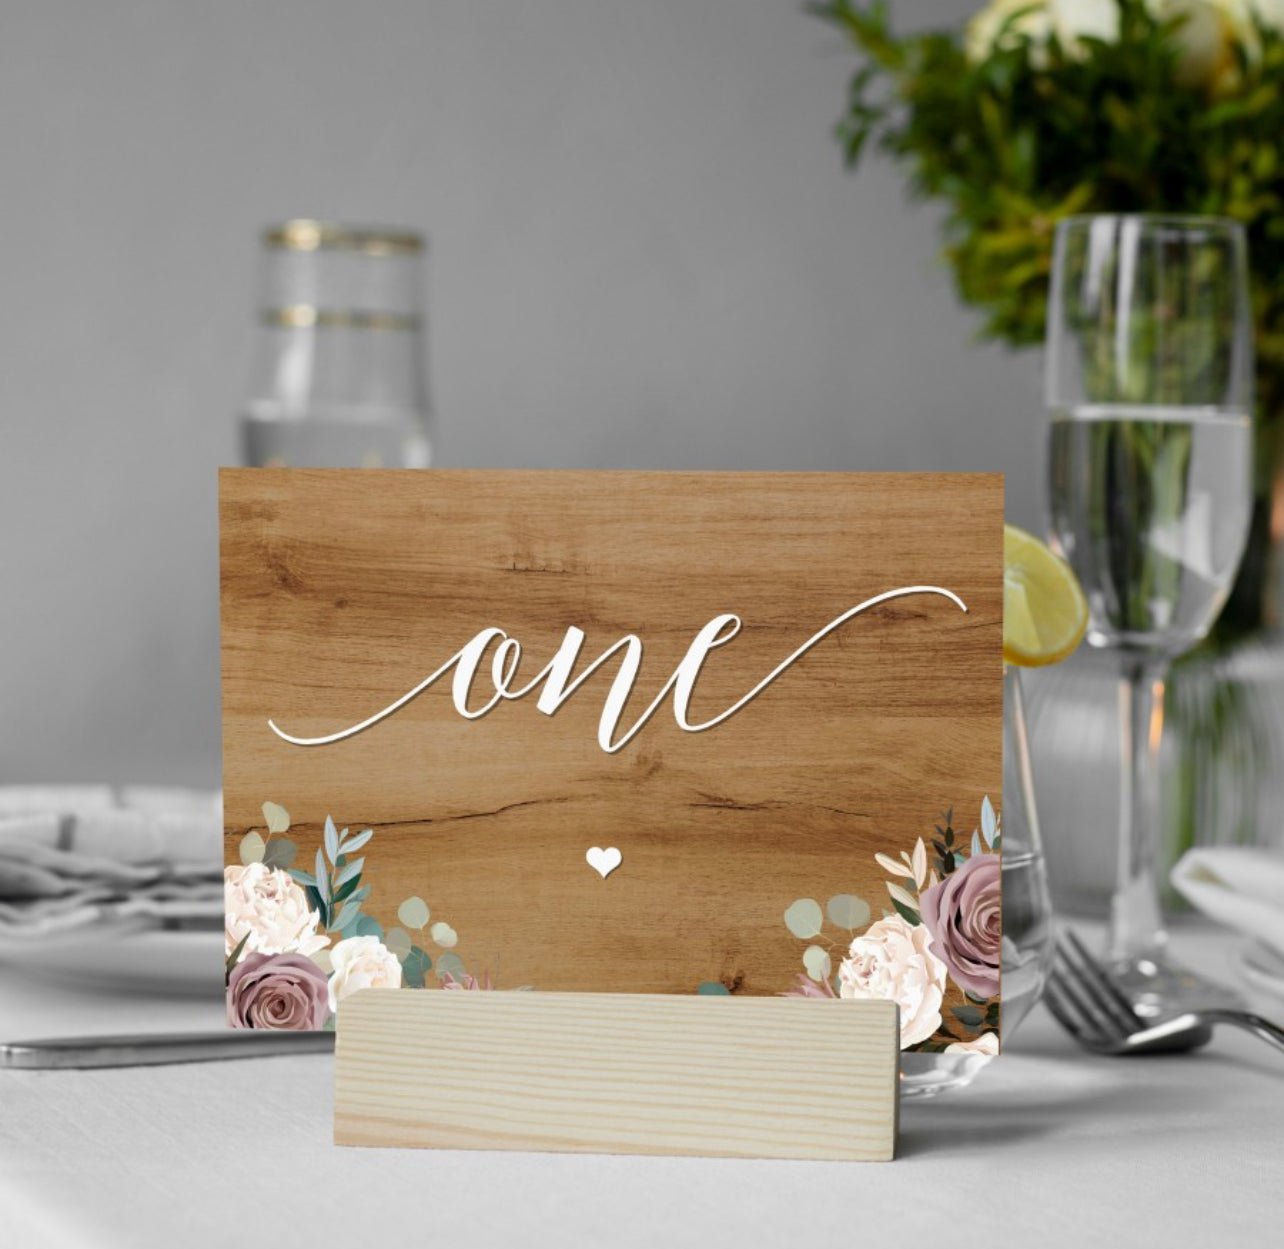 Wooden Dusky Rose Table Numbers Sign - Cute as a Button by Laura